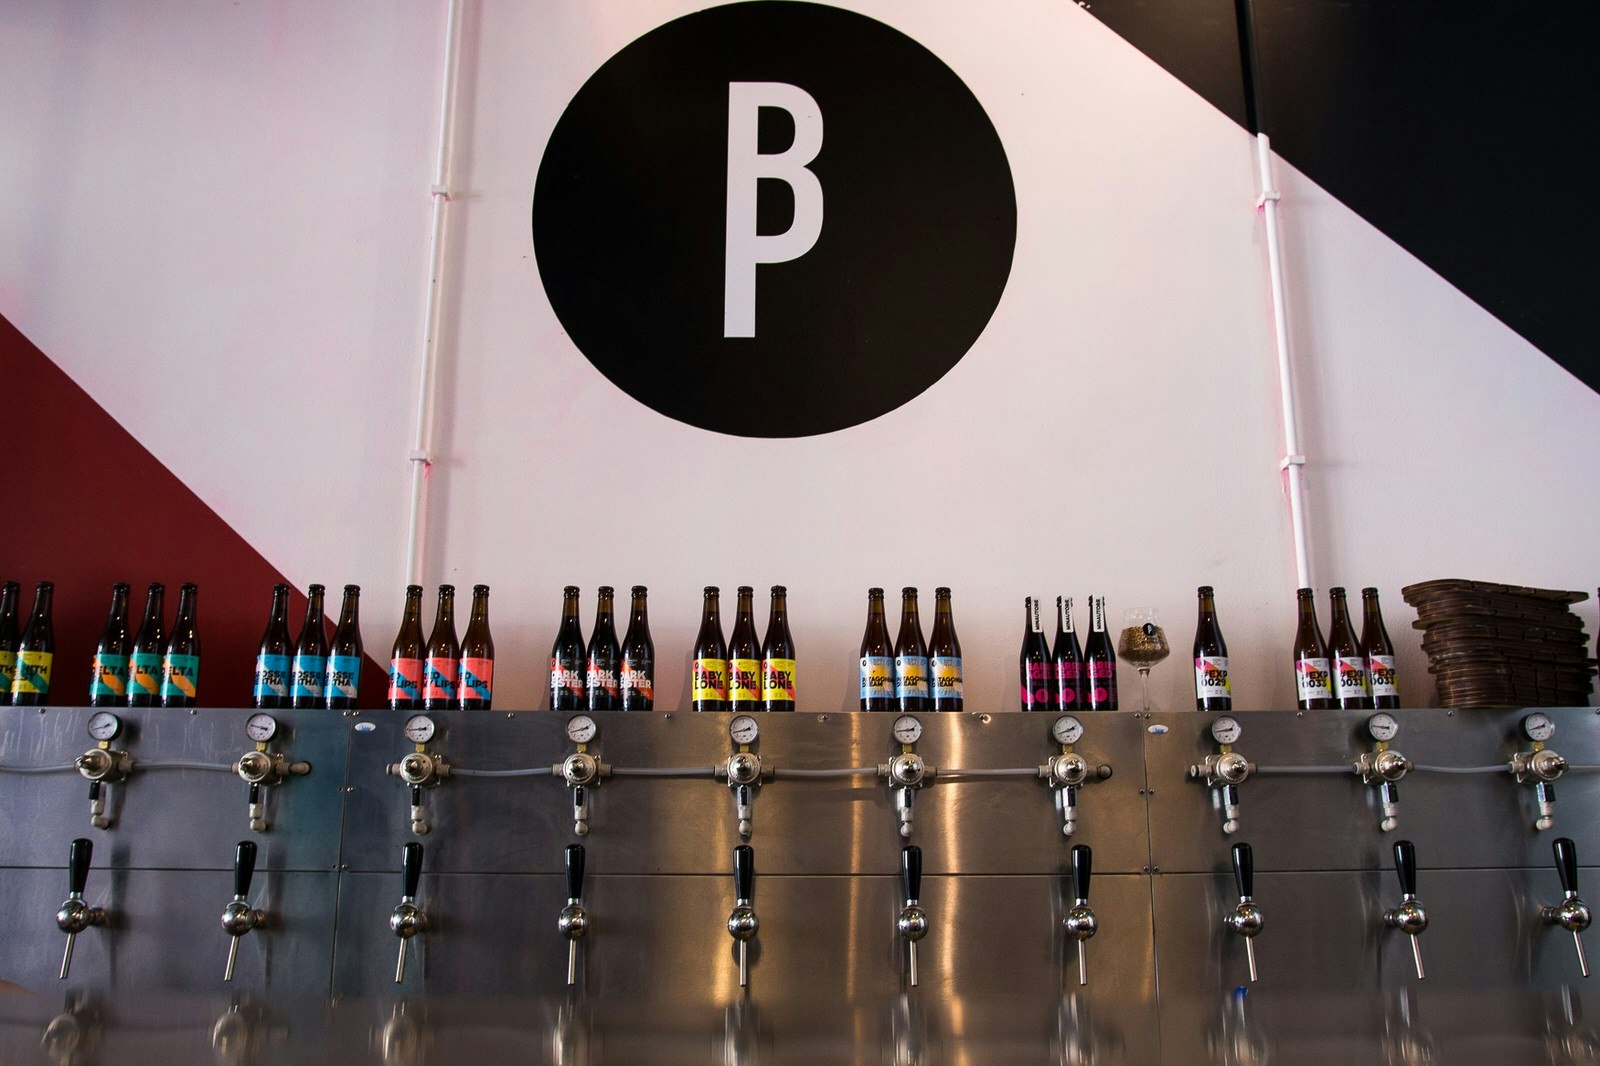 A steel bar with several beer taps with black plastic handles. Bottles of beer with colourful labels have been placed above each tap to show which beer is on tap. There is a large black logo of a capital B and P painted on to the white wall. 